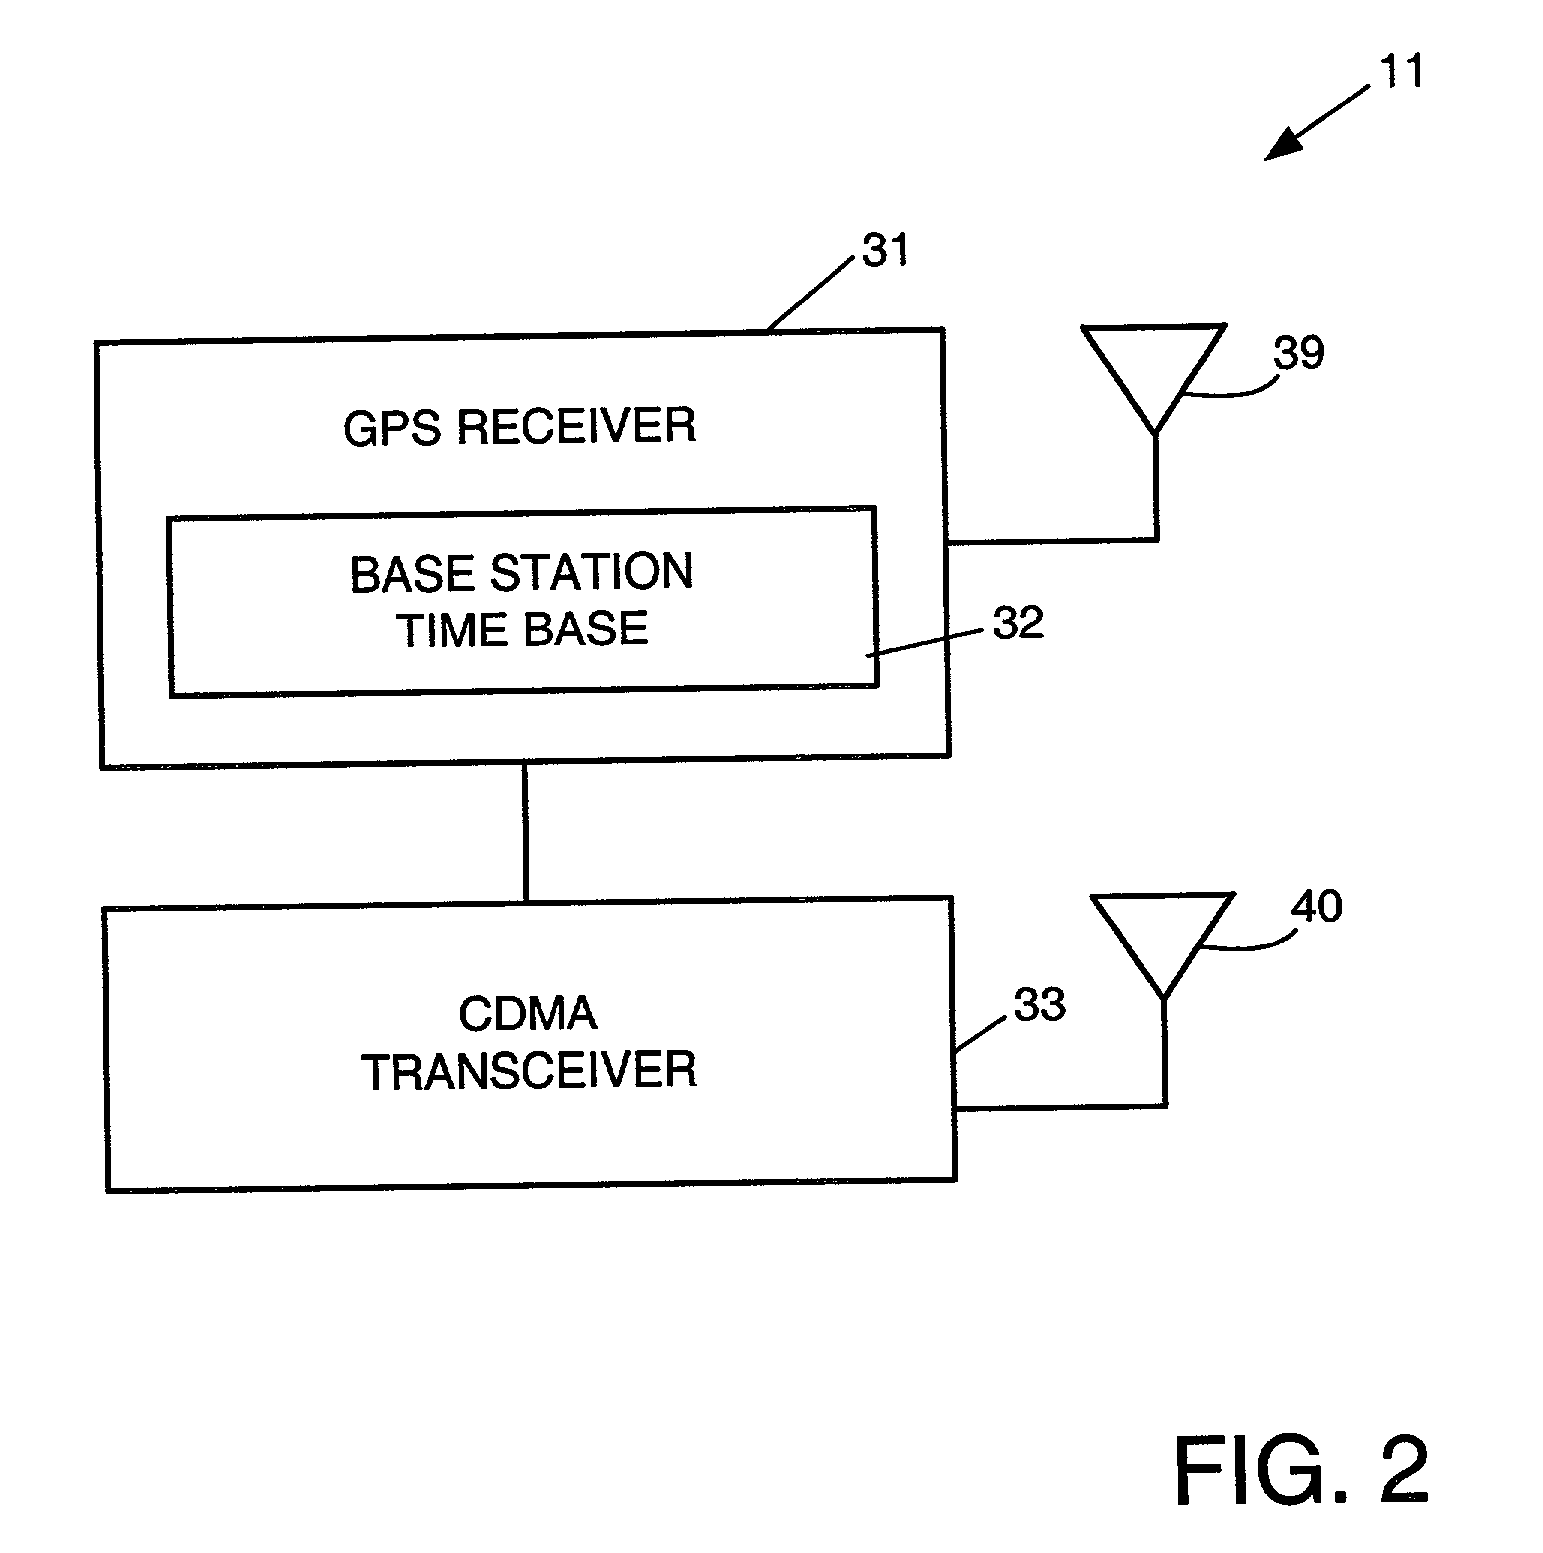 Automation of maintenance and improvement of location service parameters in a data base of a wireless mobile communication system